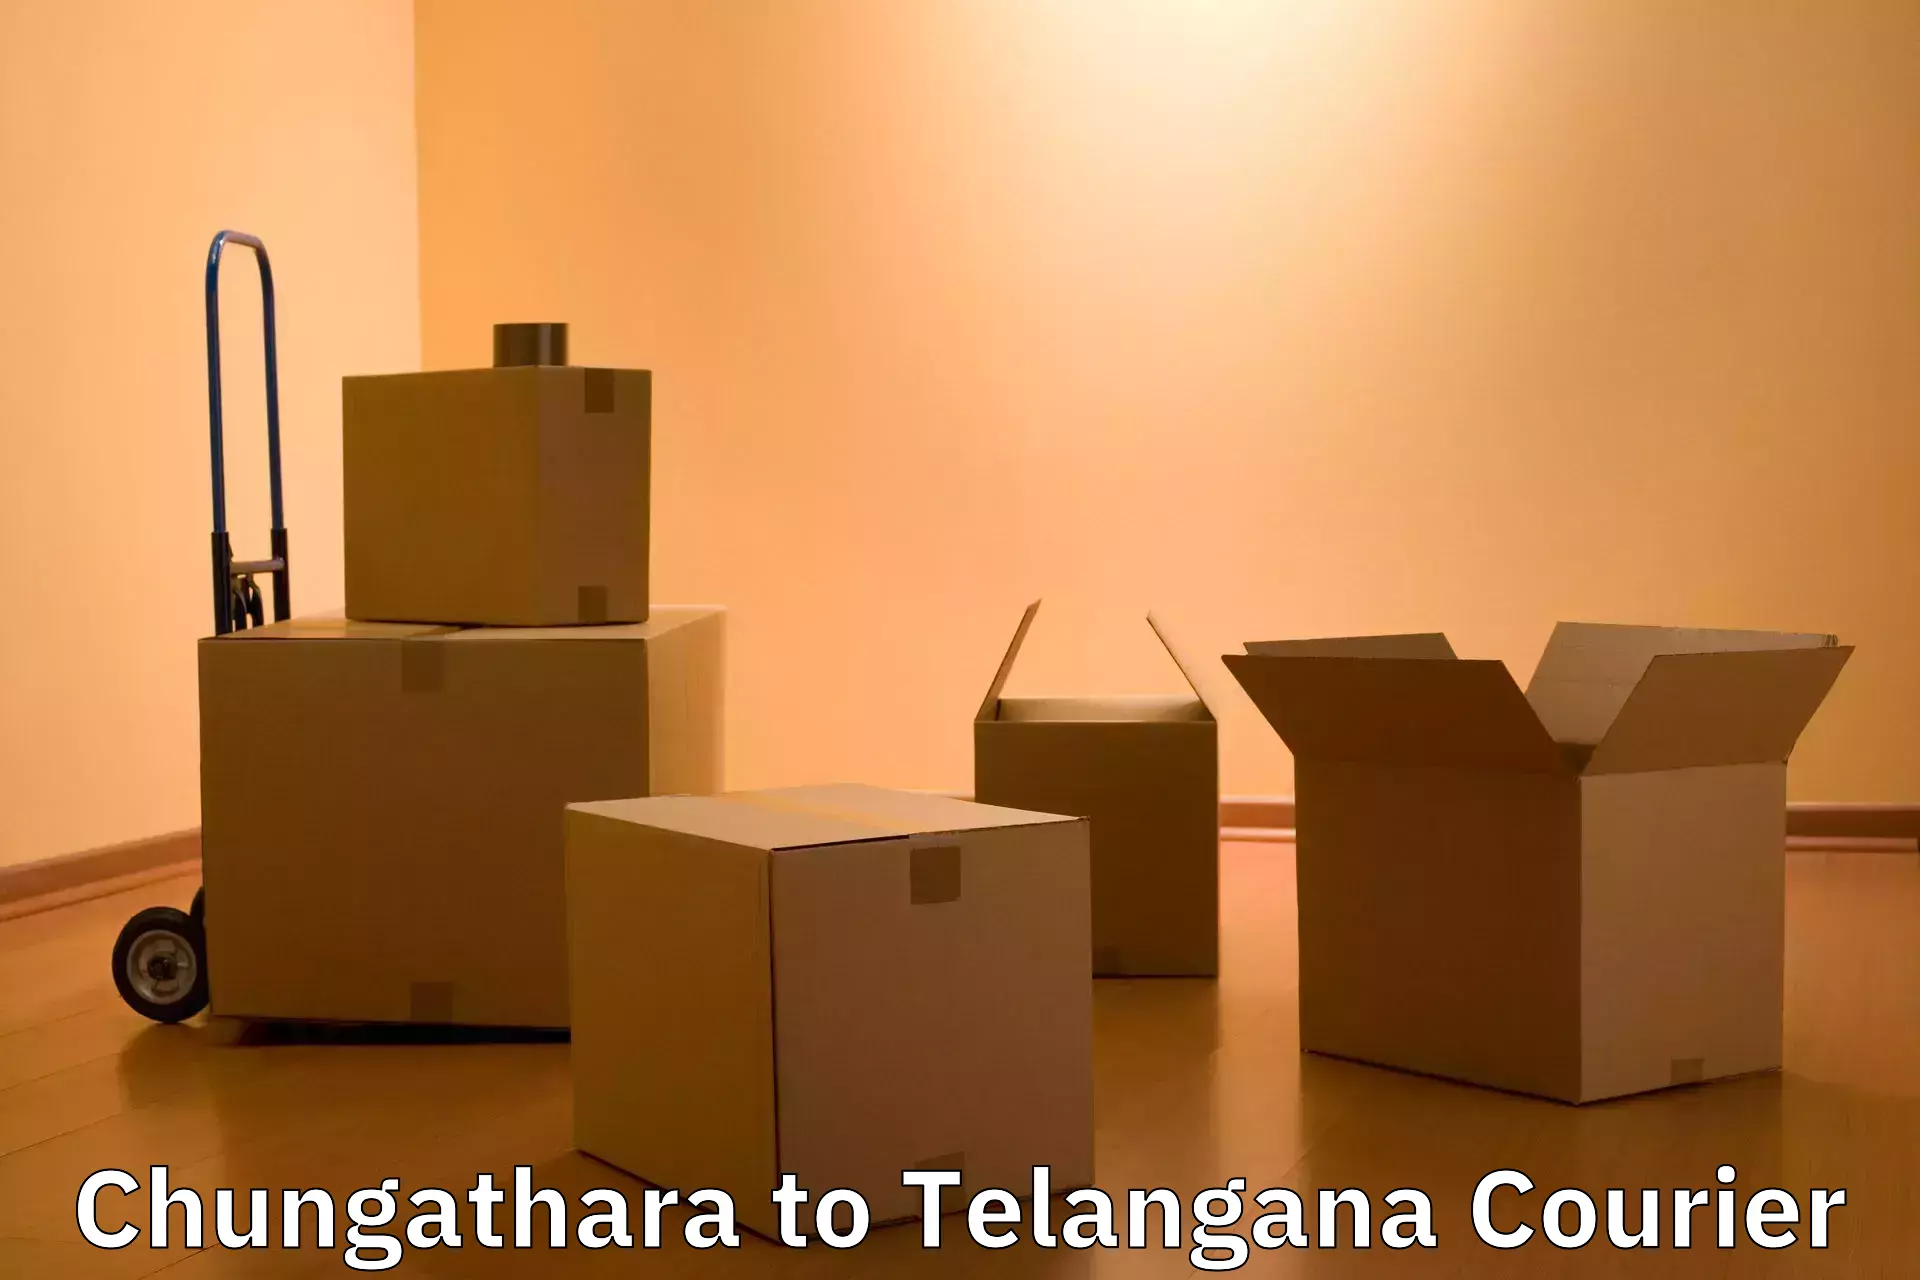 Reliable baggage delivery in Chungathara to Yellareddy